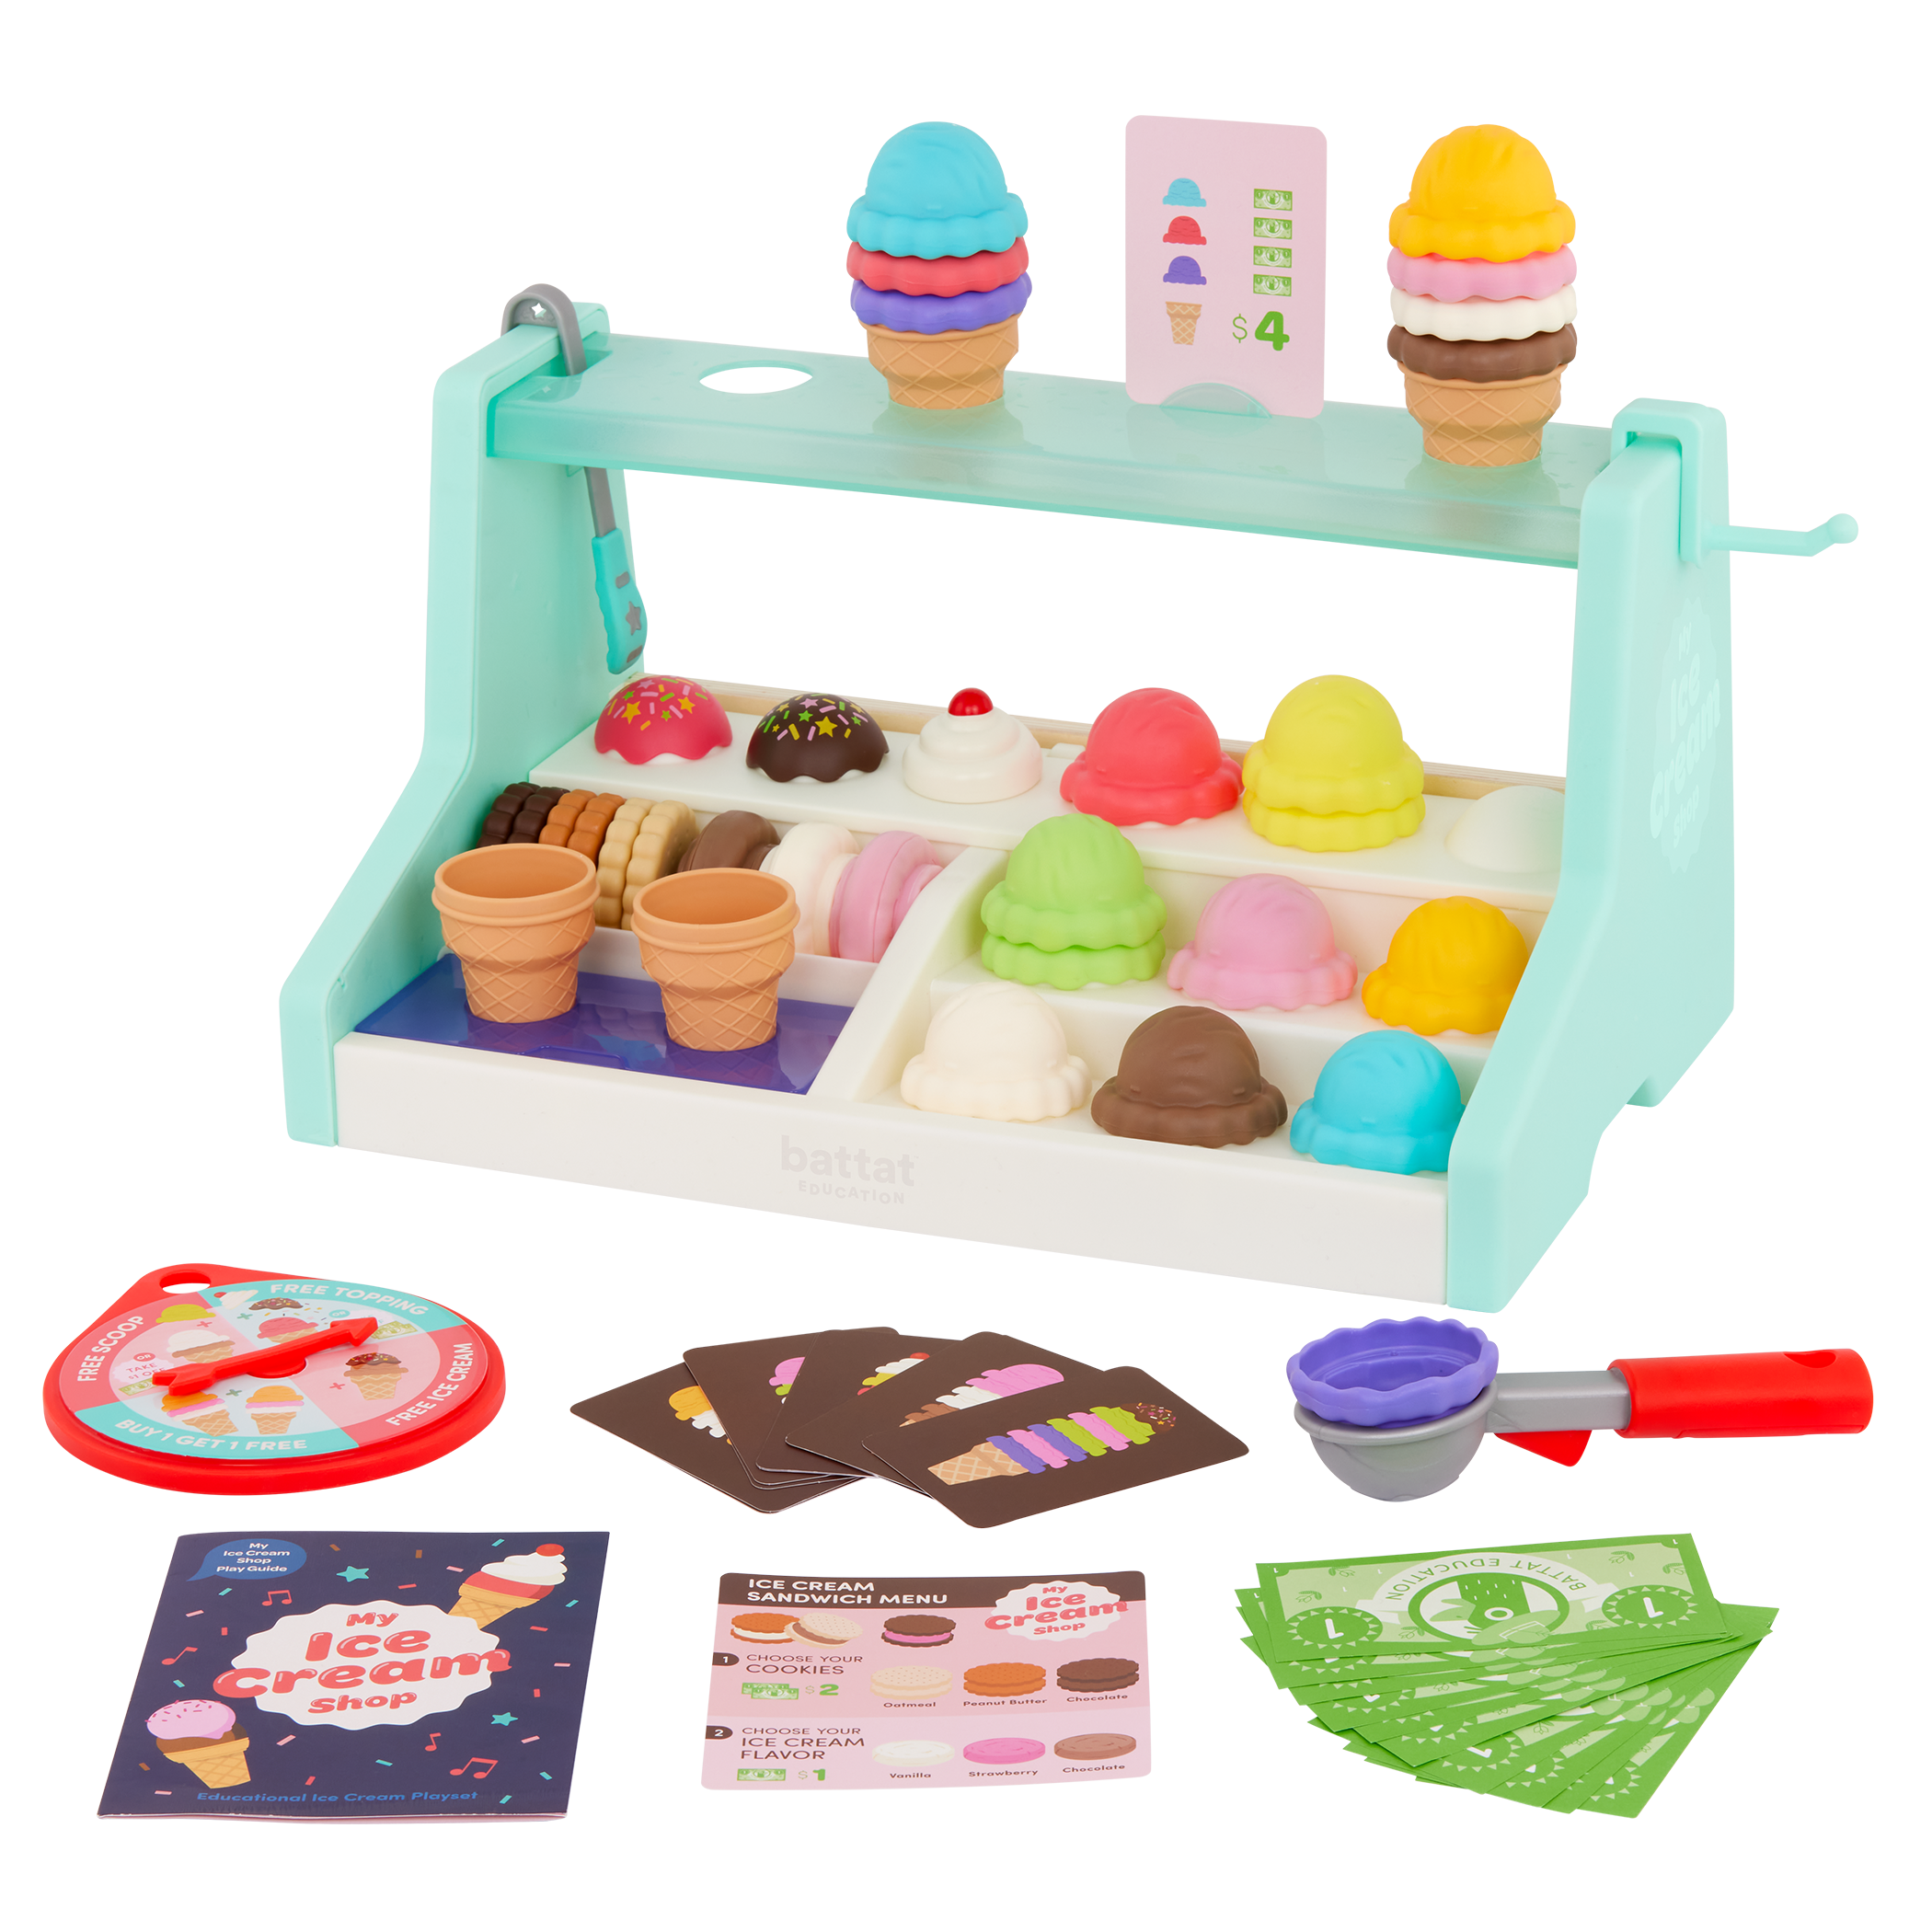 Kids Ice Cream Toy Set - Pretend Play Sweet Treats Ice Cream Parlour  Dessert Accessories Playset with Cone and Scoop for Toddler Imaginary Play